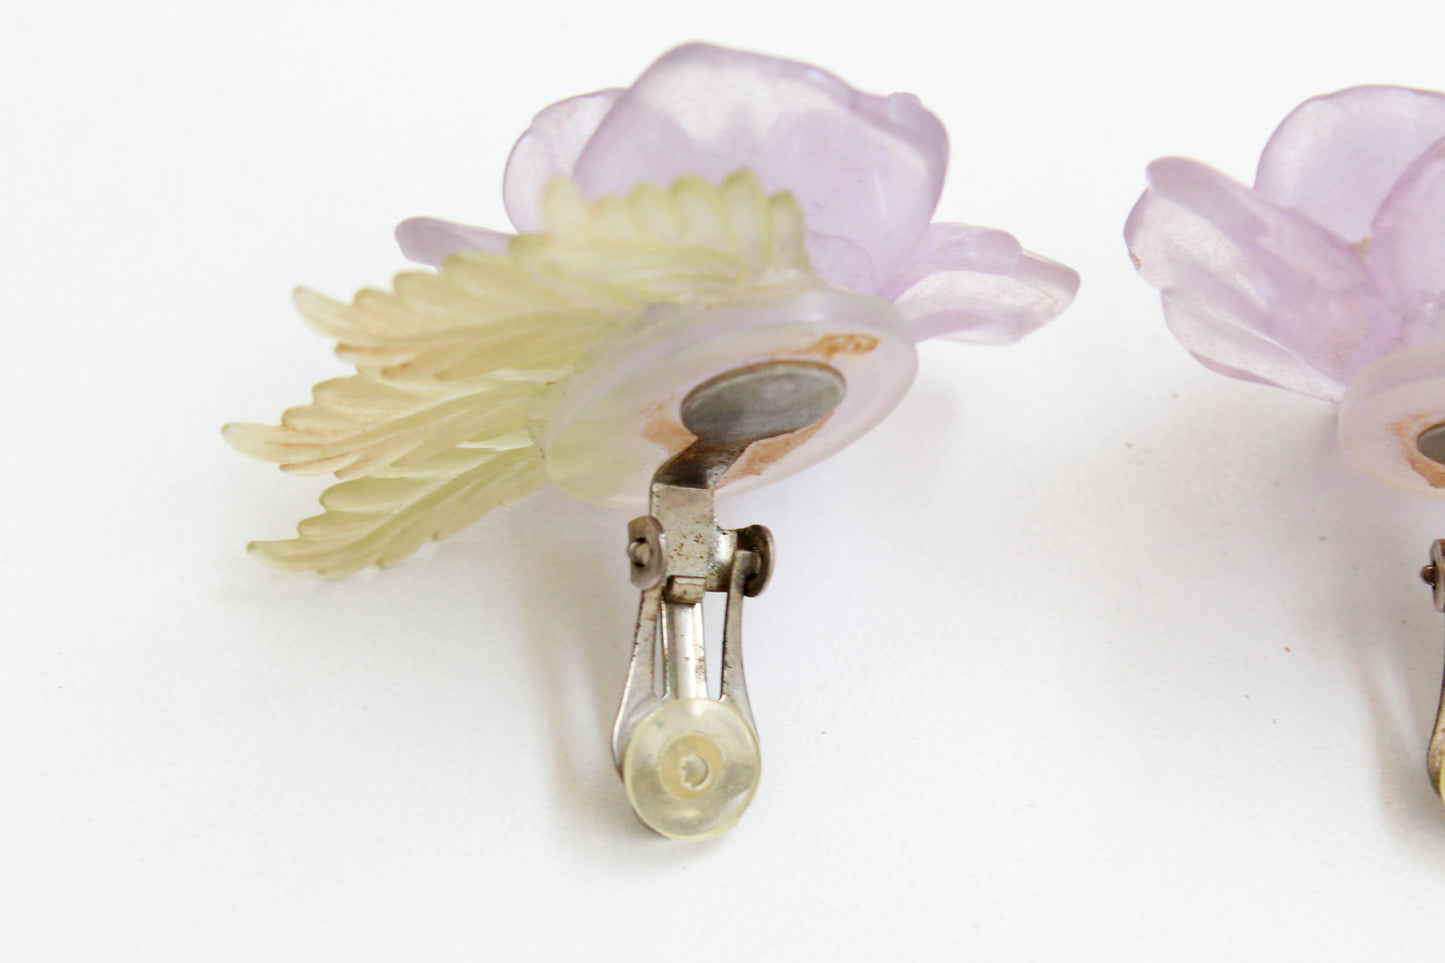 lilac plastic rose statement earrings, with translucent green leaves and rhinestone centres. vintage clip on earrings